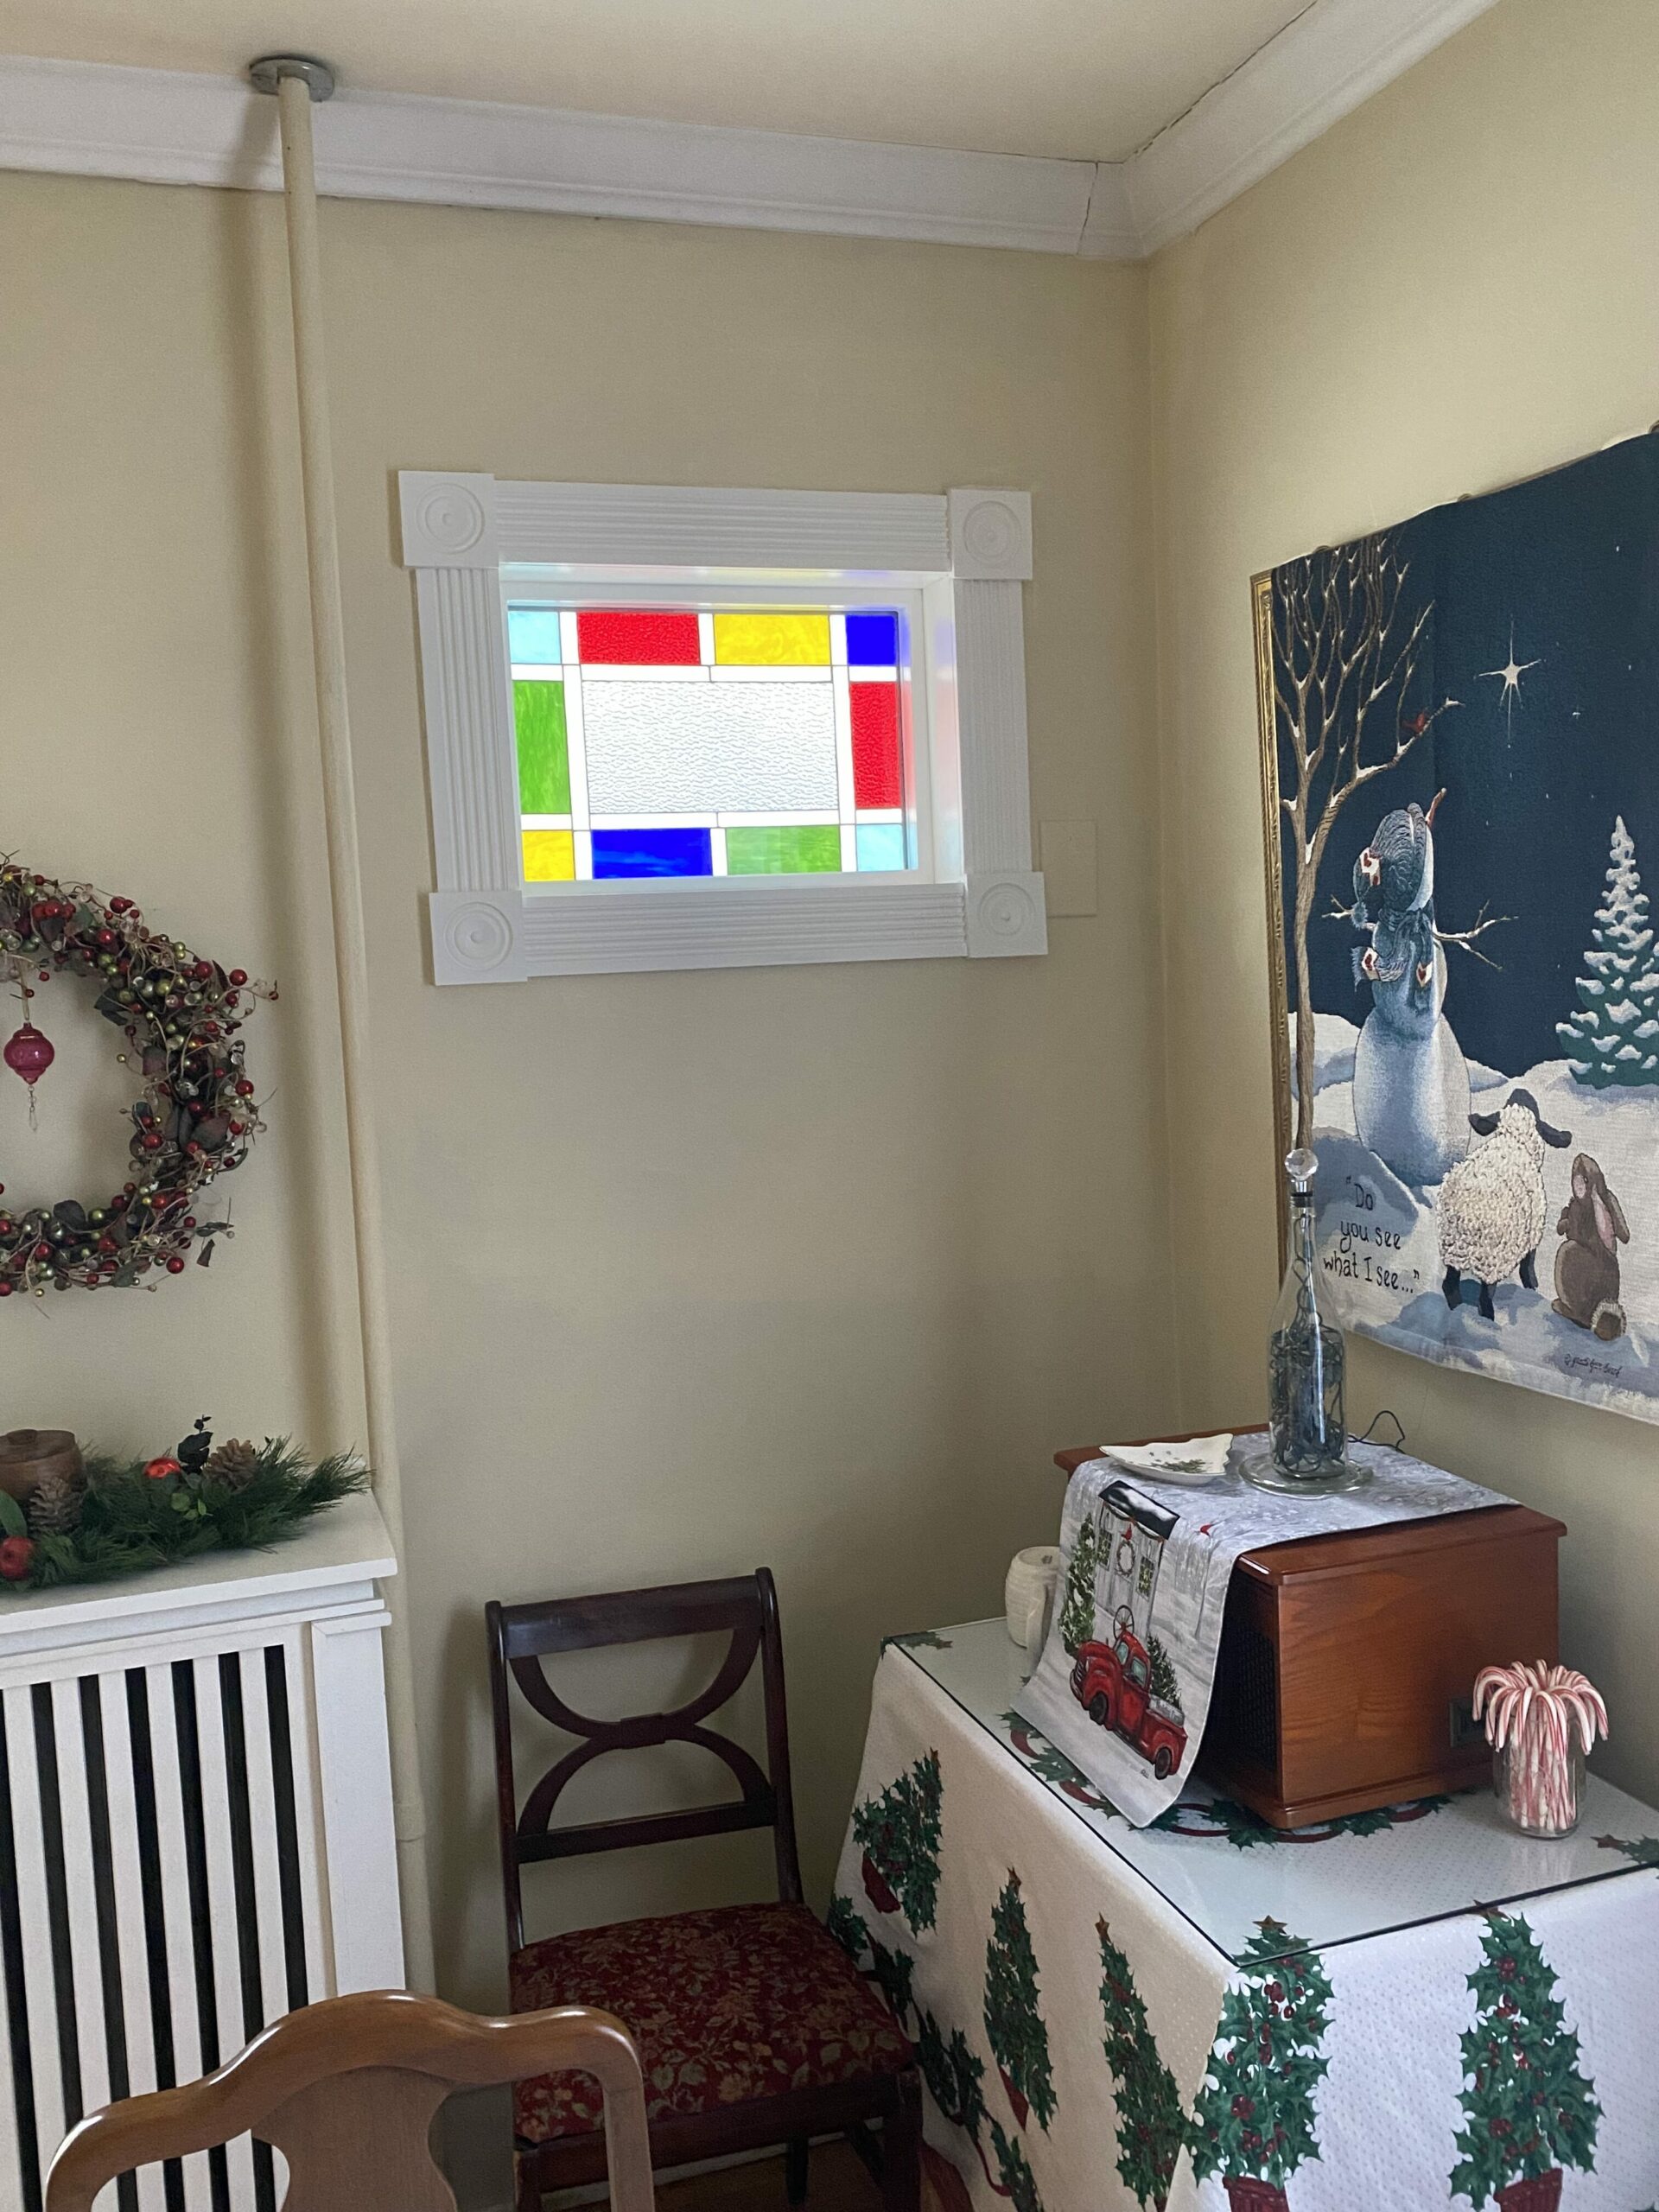 Nice installed Stained Glass Window replacing an AC unit